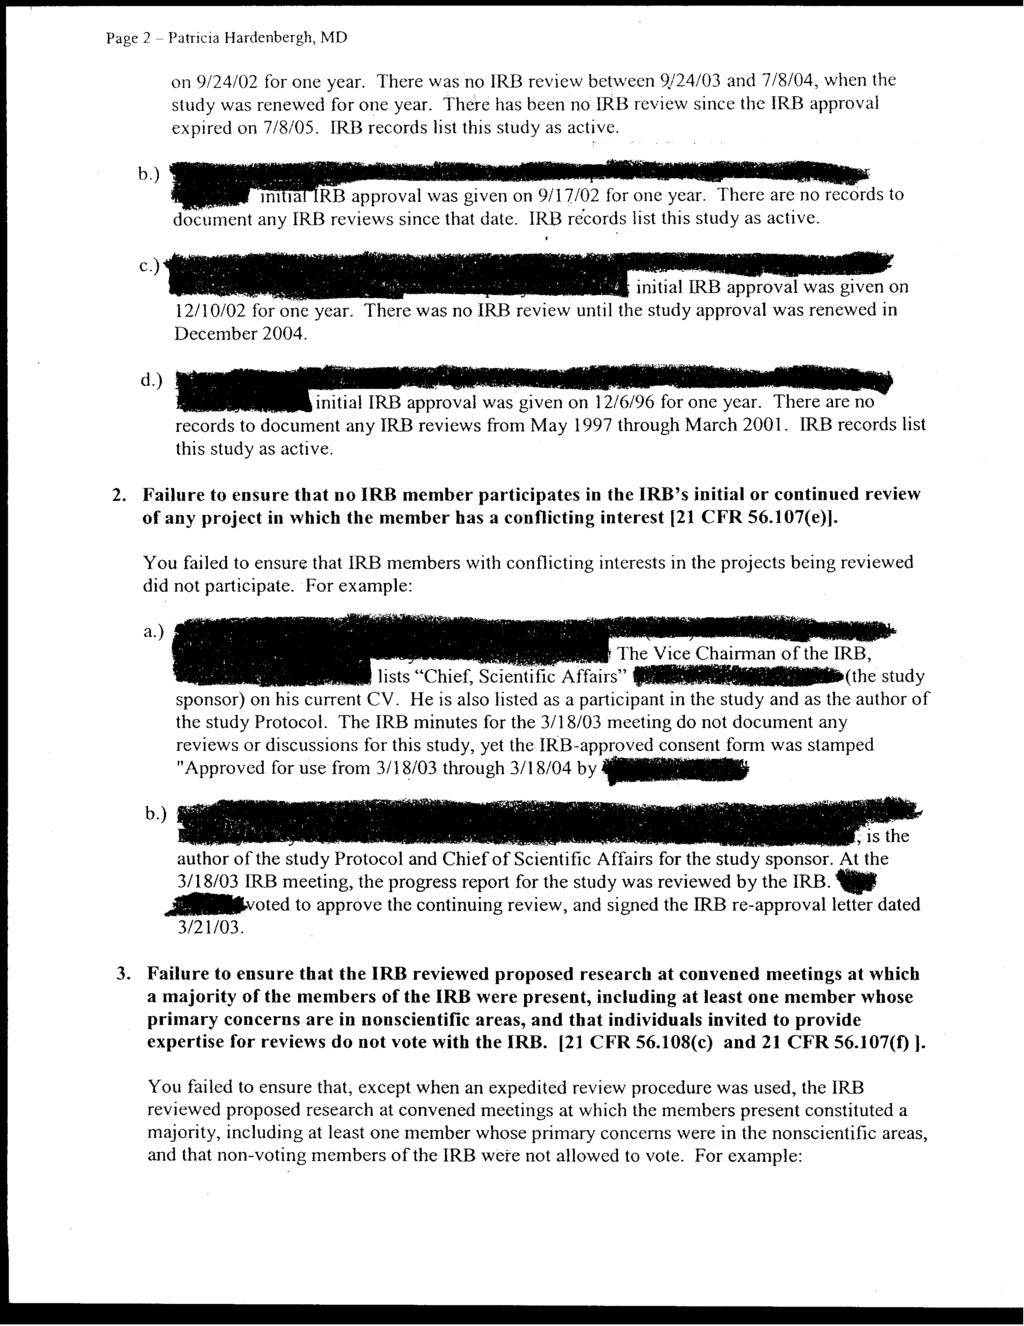 Page 2 - Patricia Hardenbergh, MD on 9/24/02 for one year. There was no IRB review between 9,/24/03 and 7/8/04, when the study was renewed for one year.